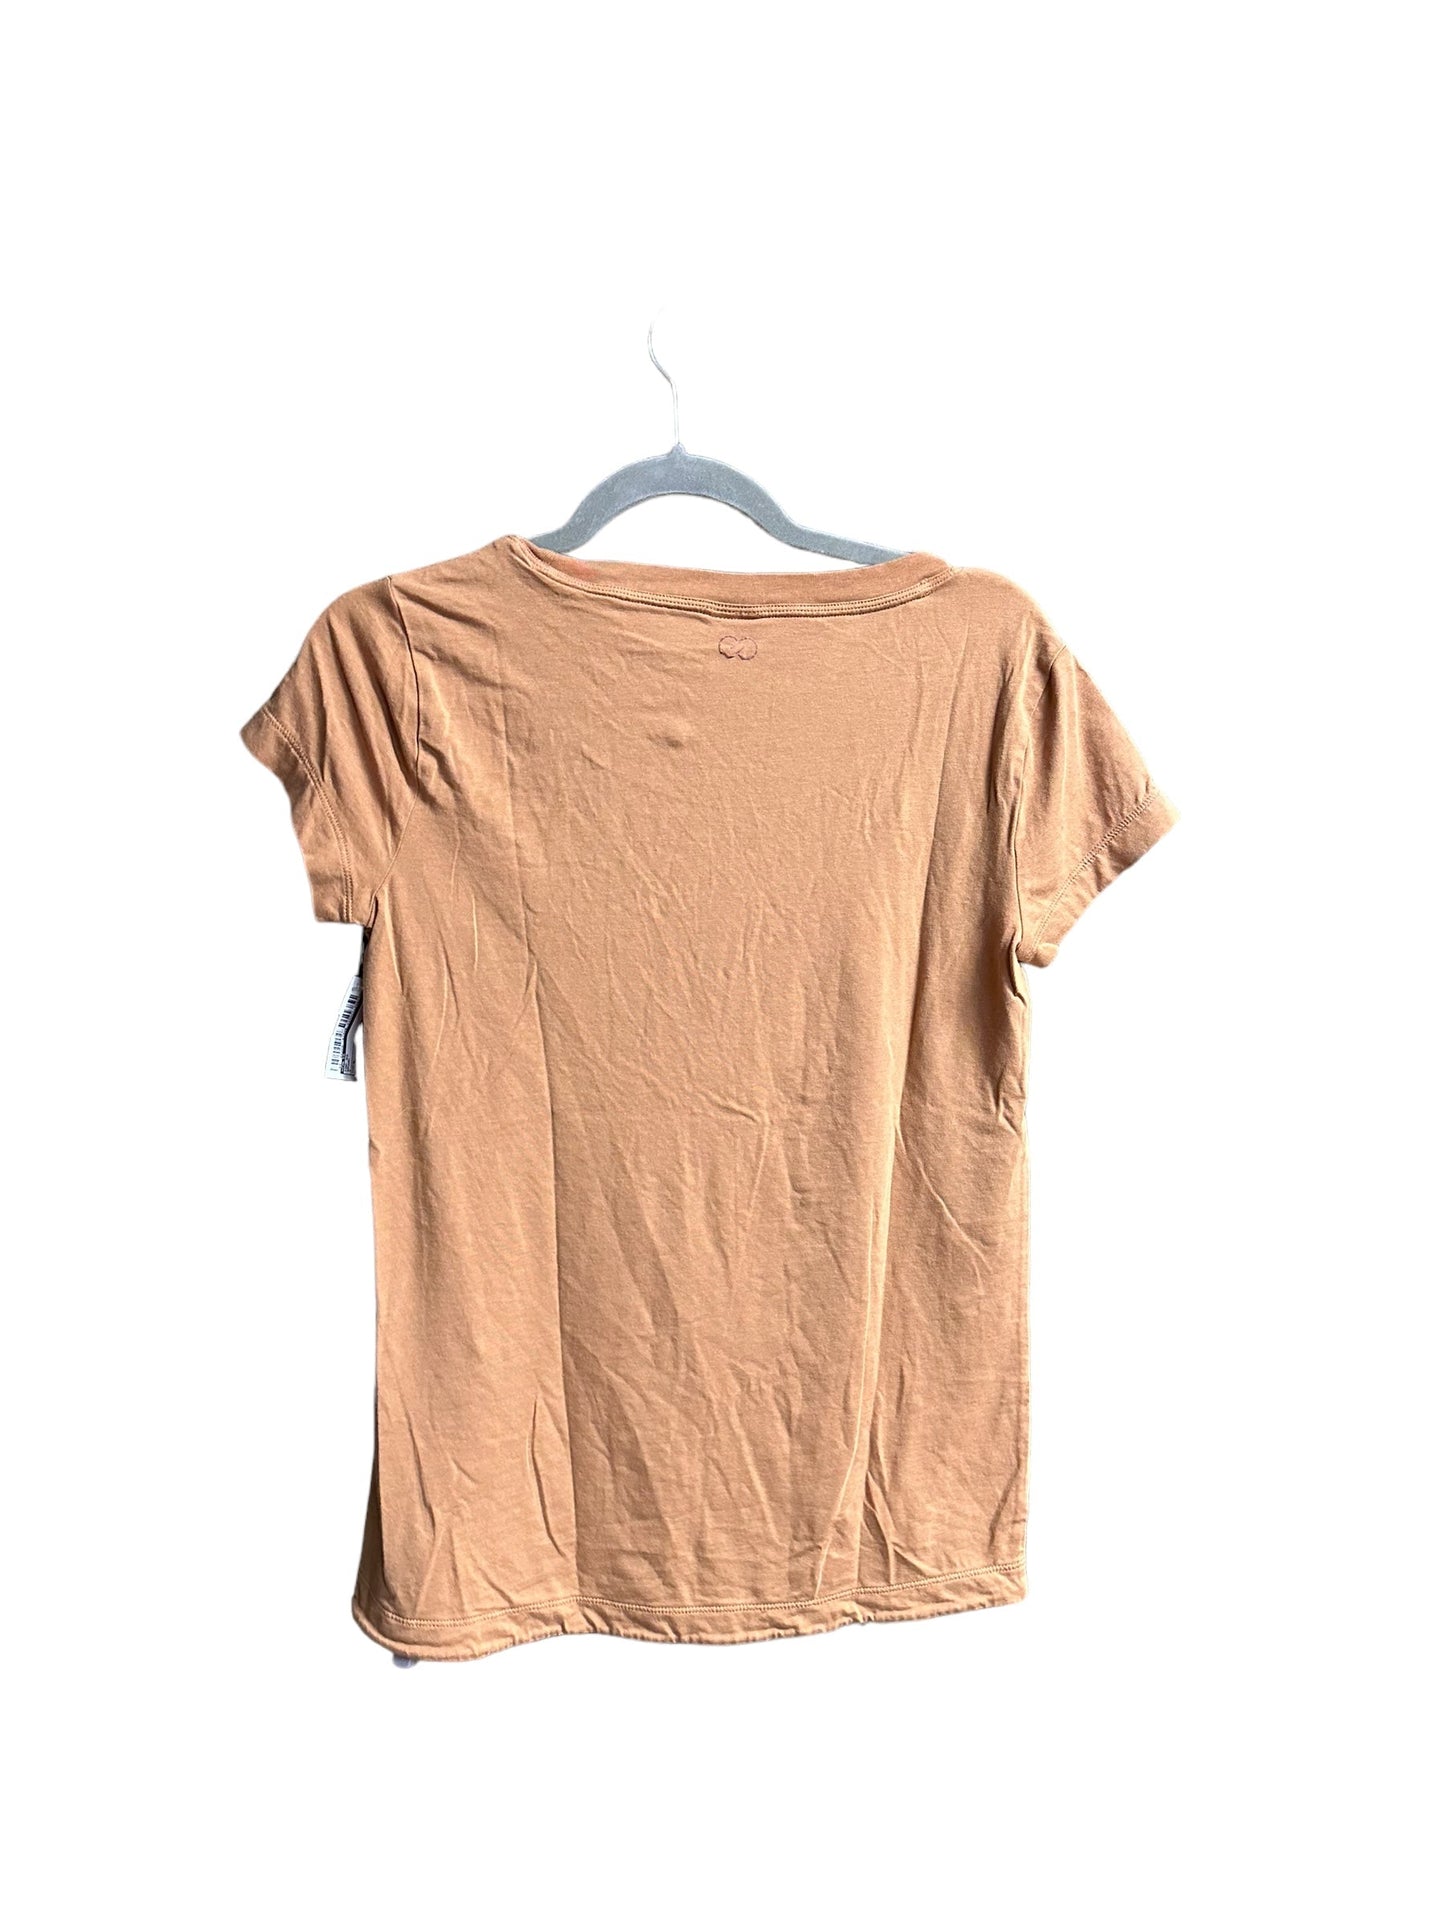 Brown Top Short Sleeve Calia, Size S